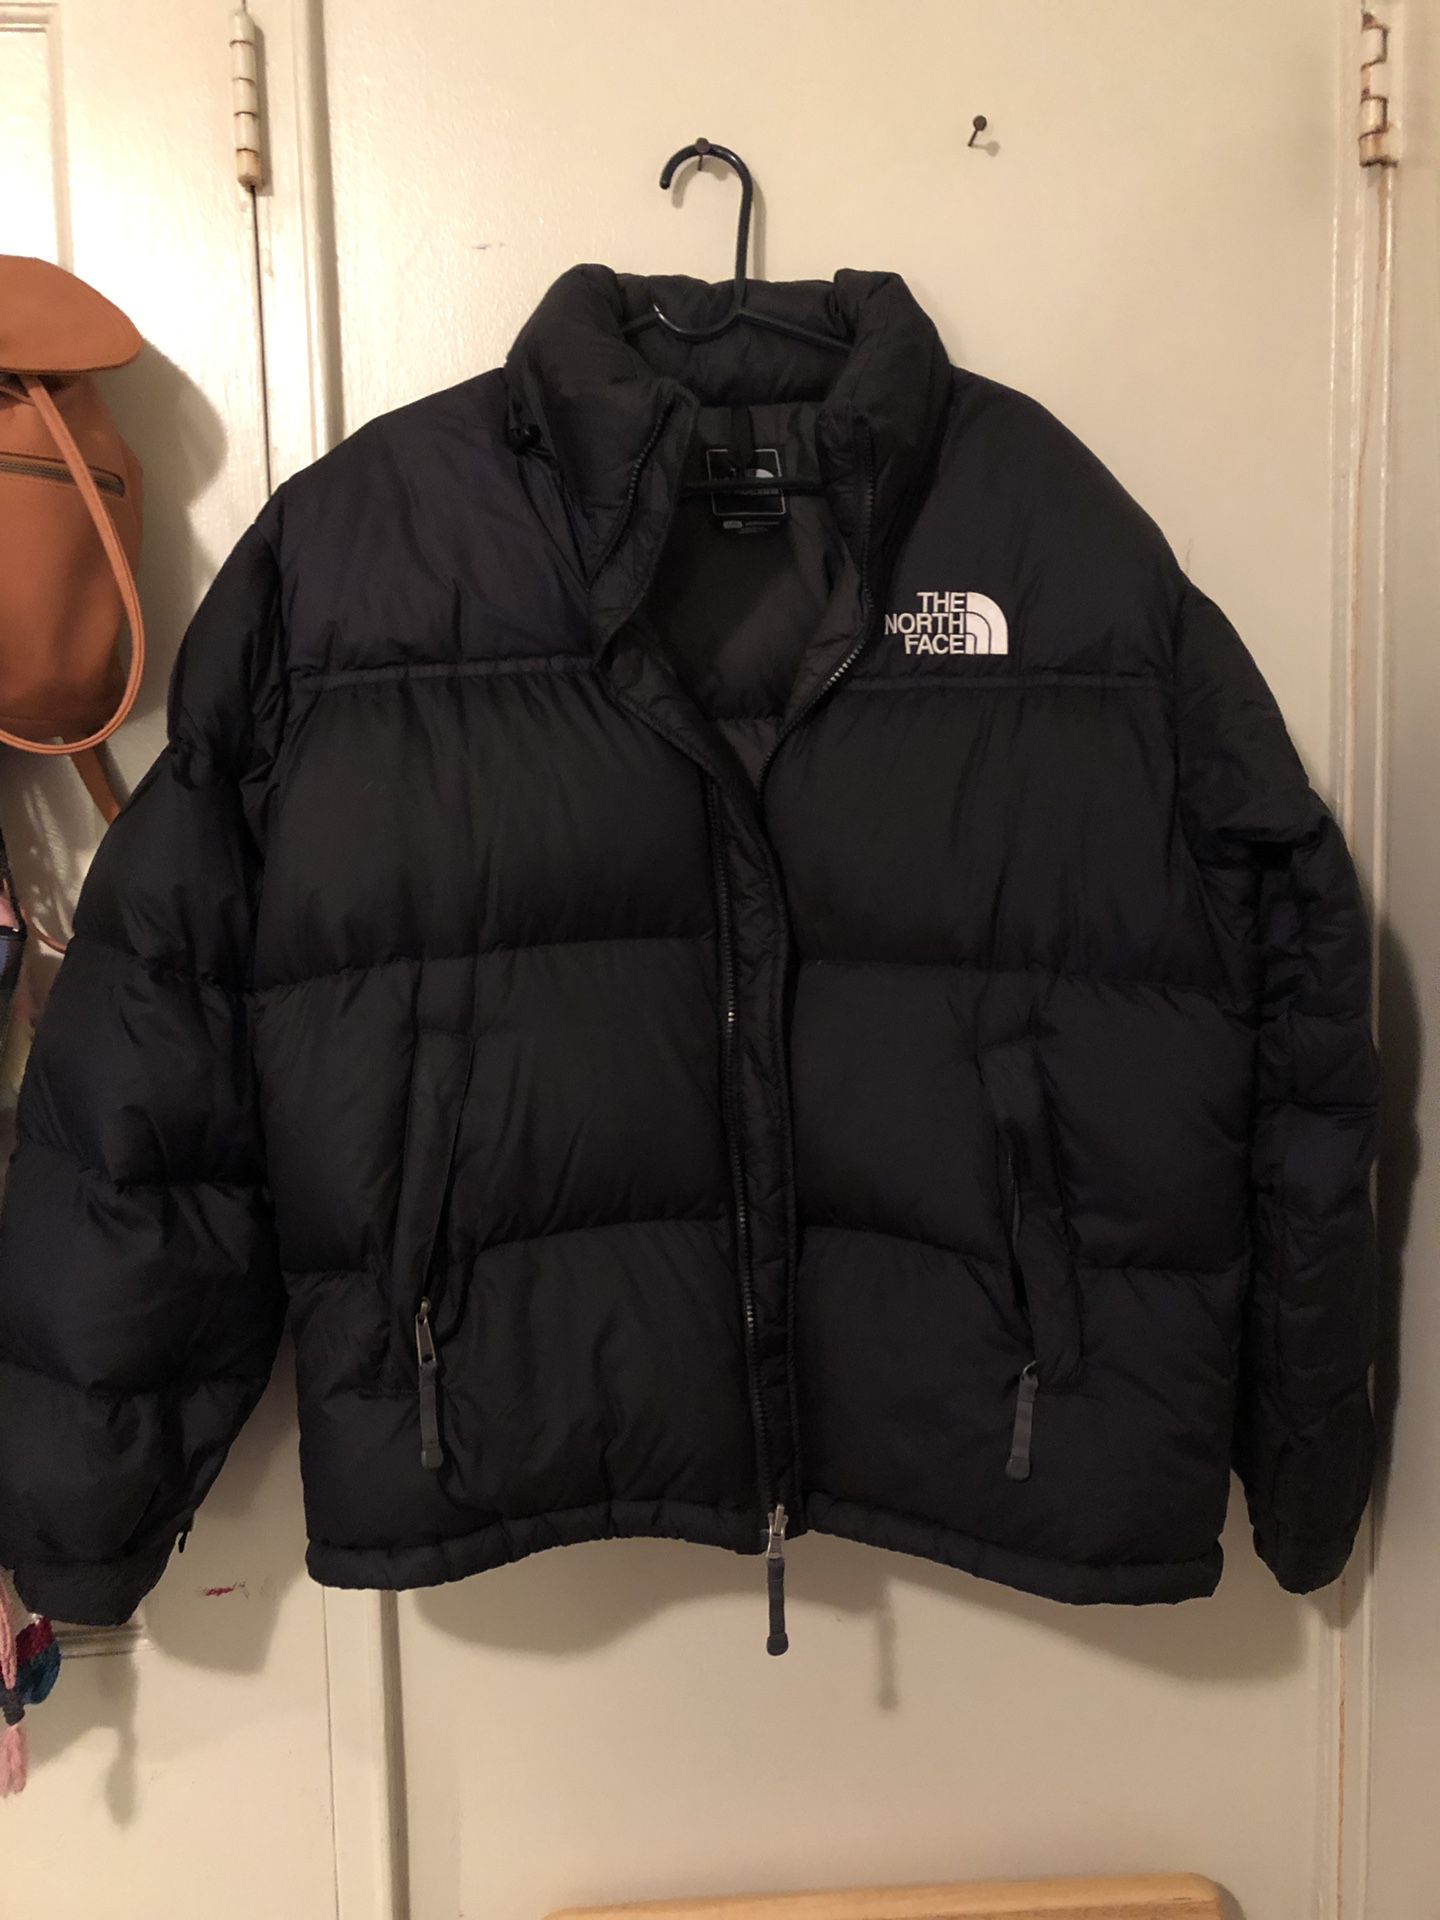 !SPRING CLEANING! Men’s North Face Puffer Jacket